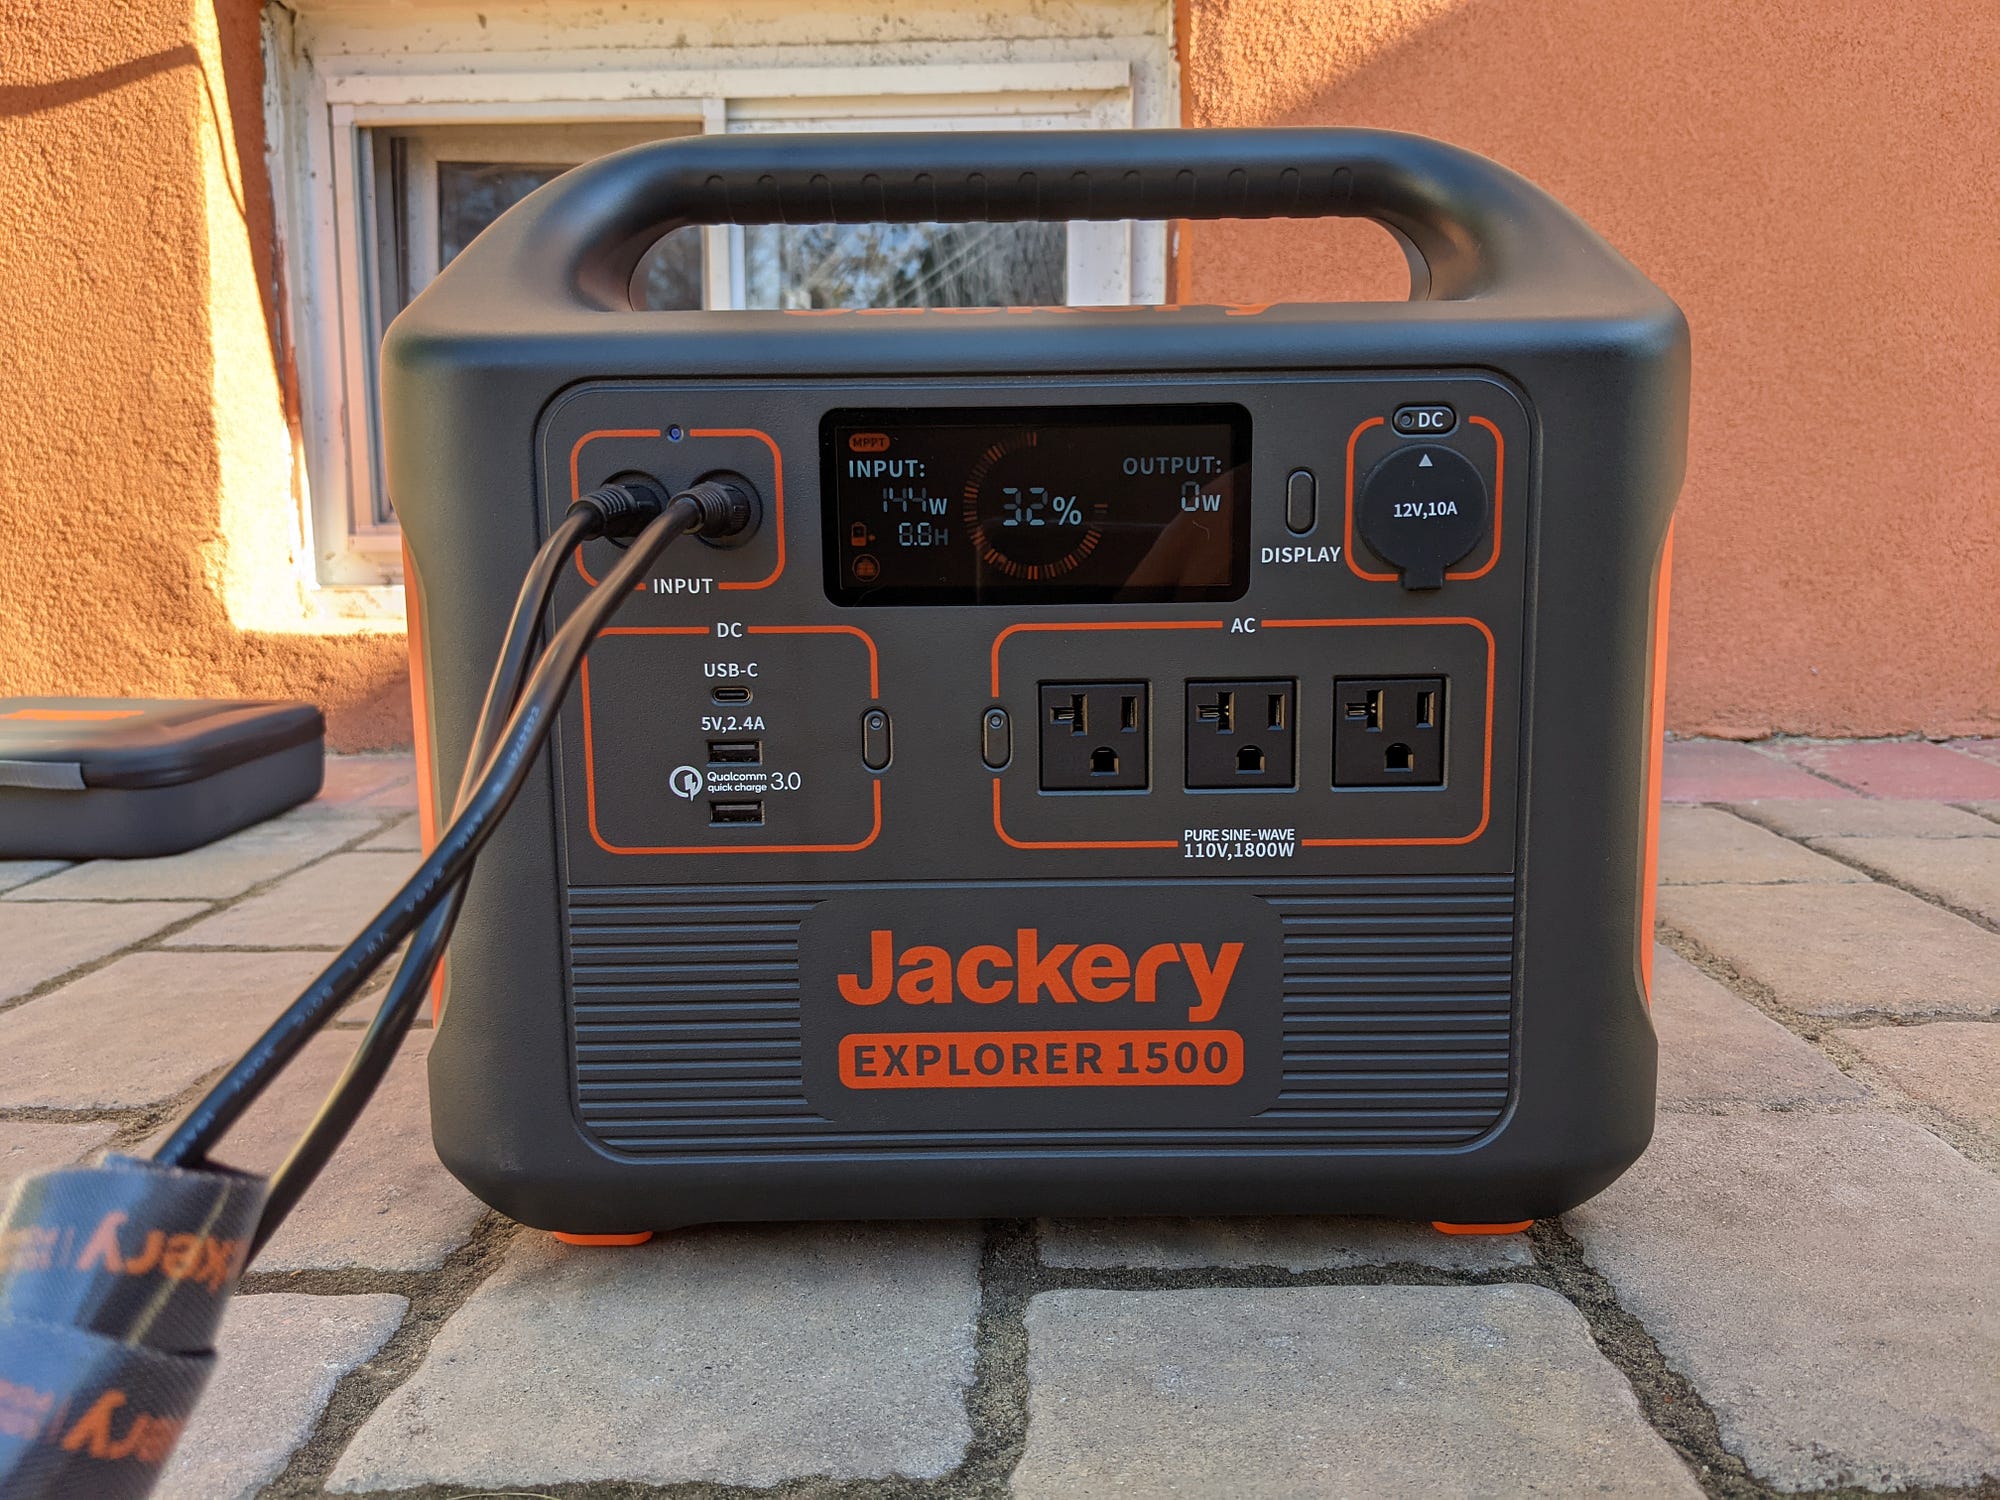 Jackery Explorer 1500W Portable Power Station Review: more power, more  weight | by Stefan Etienne | LaptopMemo